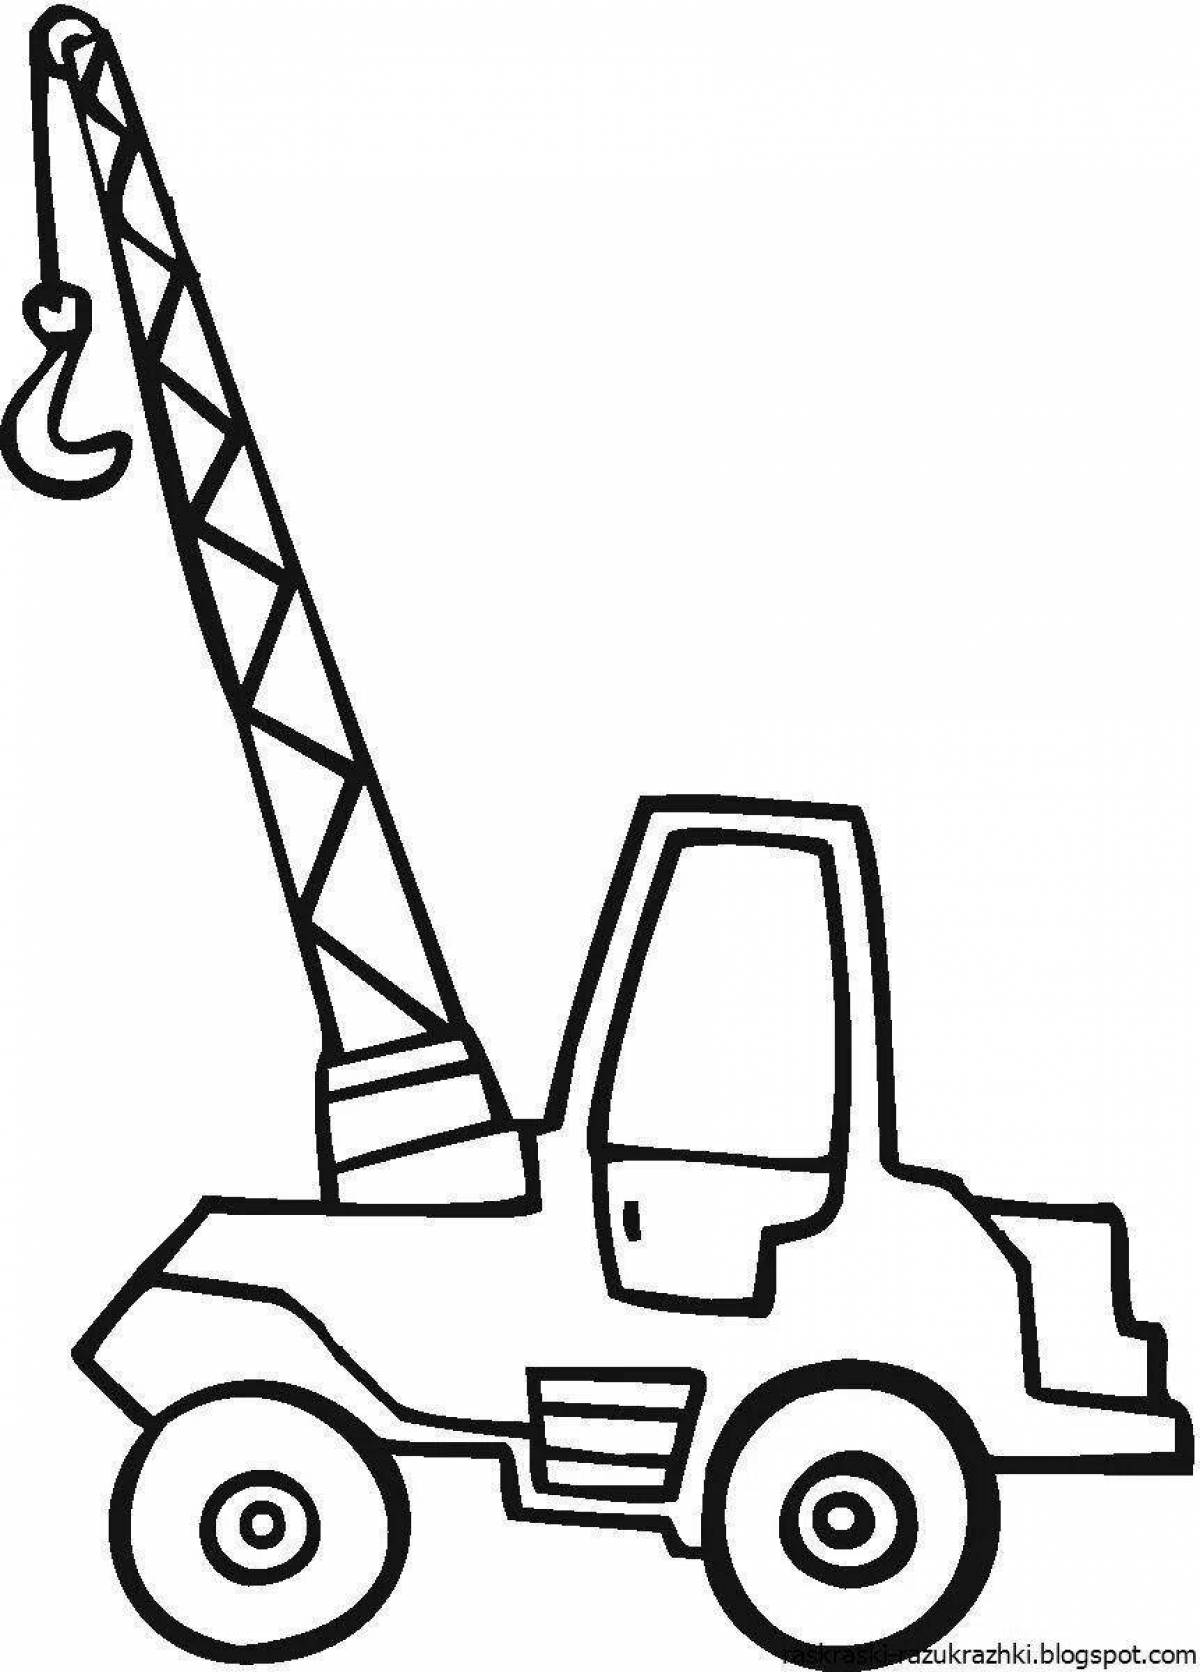 Sweet crane coloring pages for kids